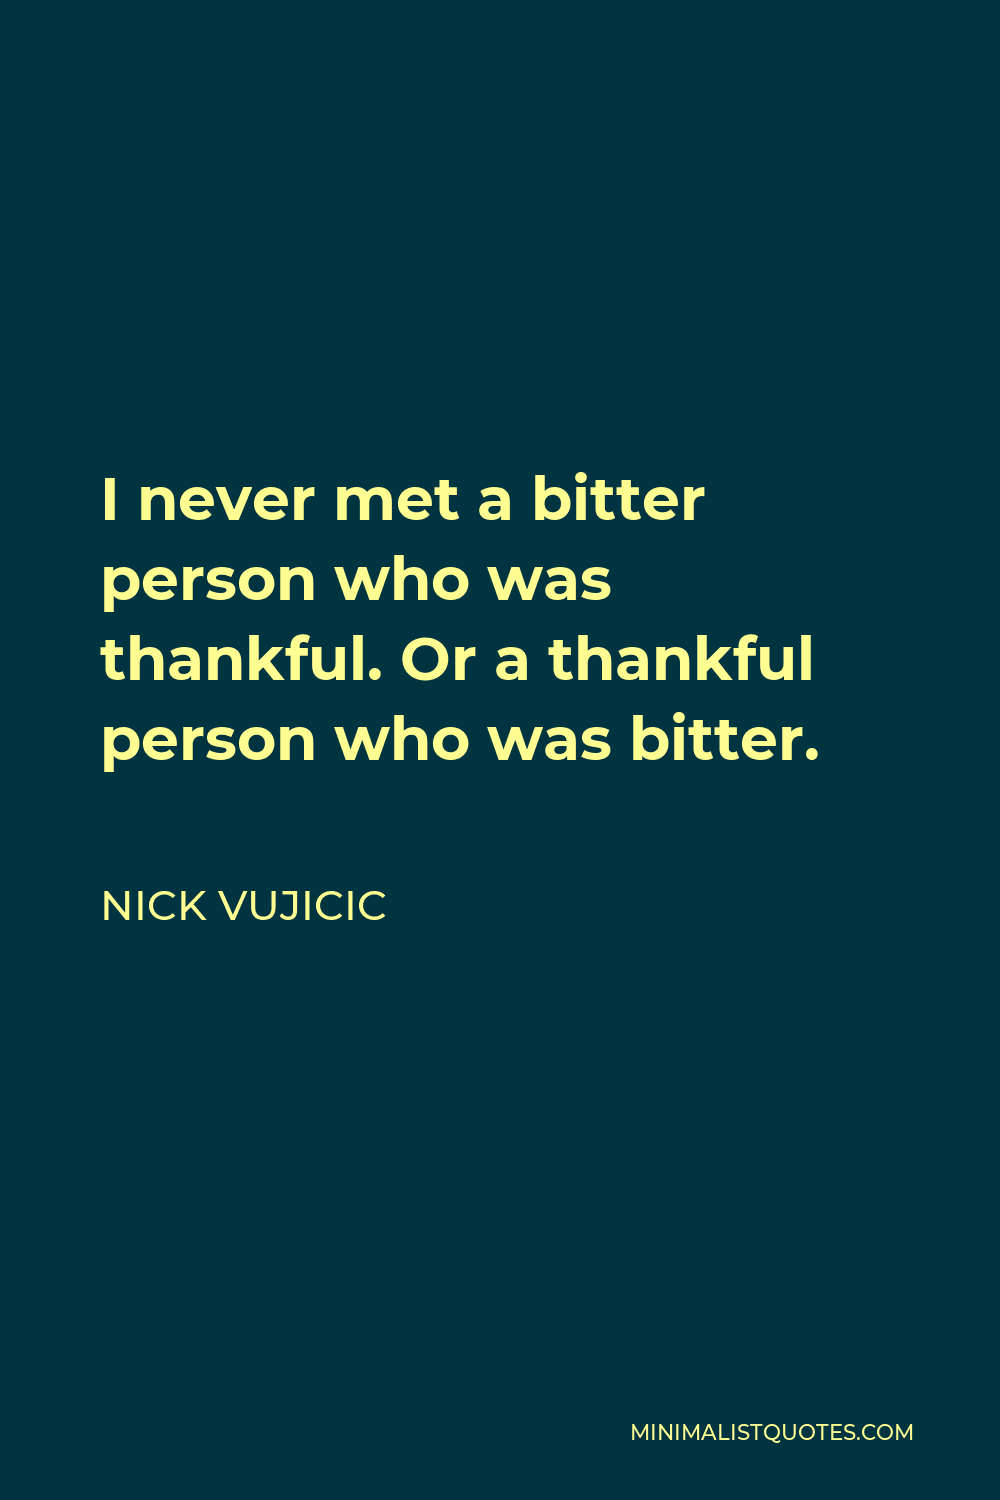 Nick Vujicic Quote - I never met a bitter person who was thankful. Or a thankful person who was bitter.